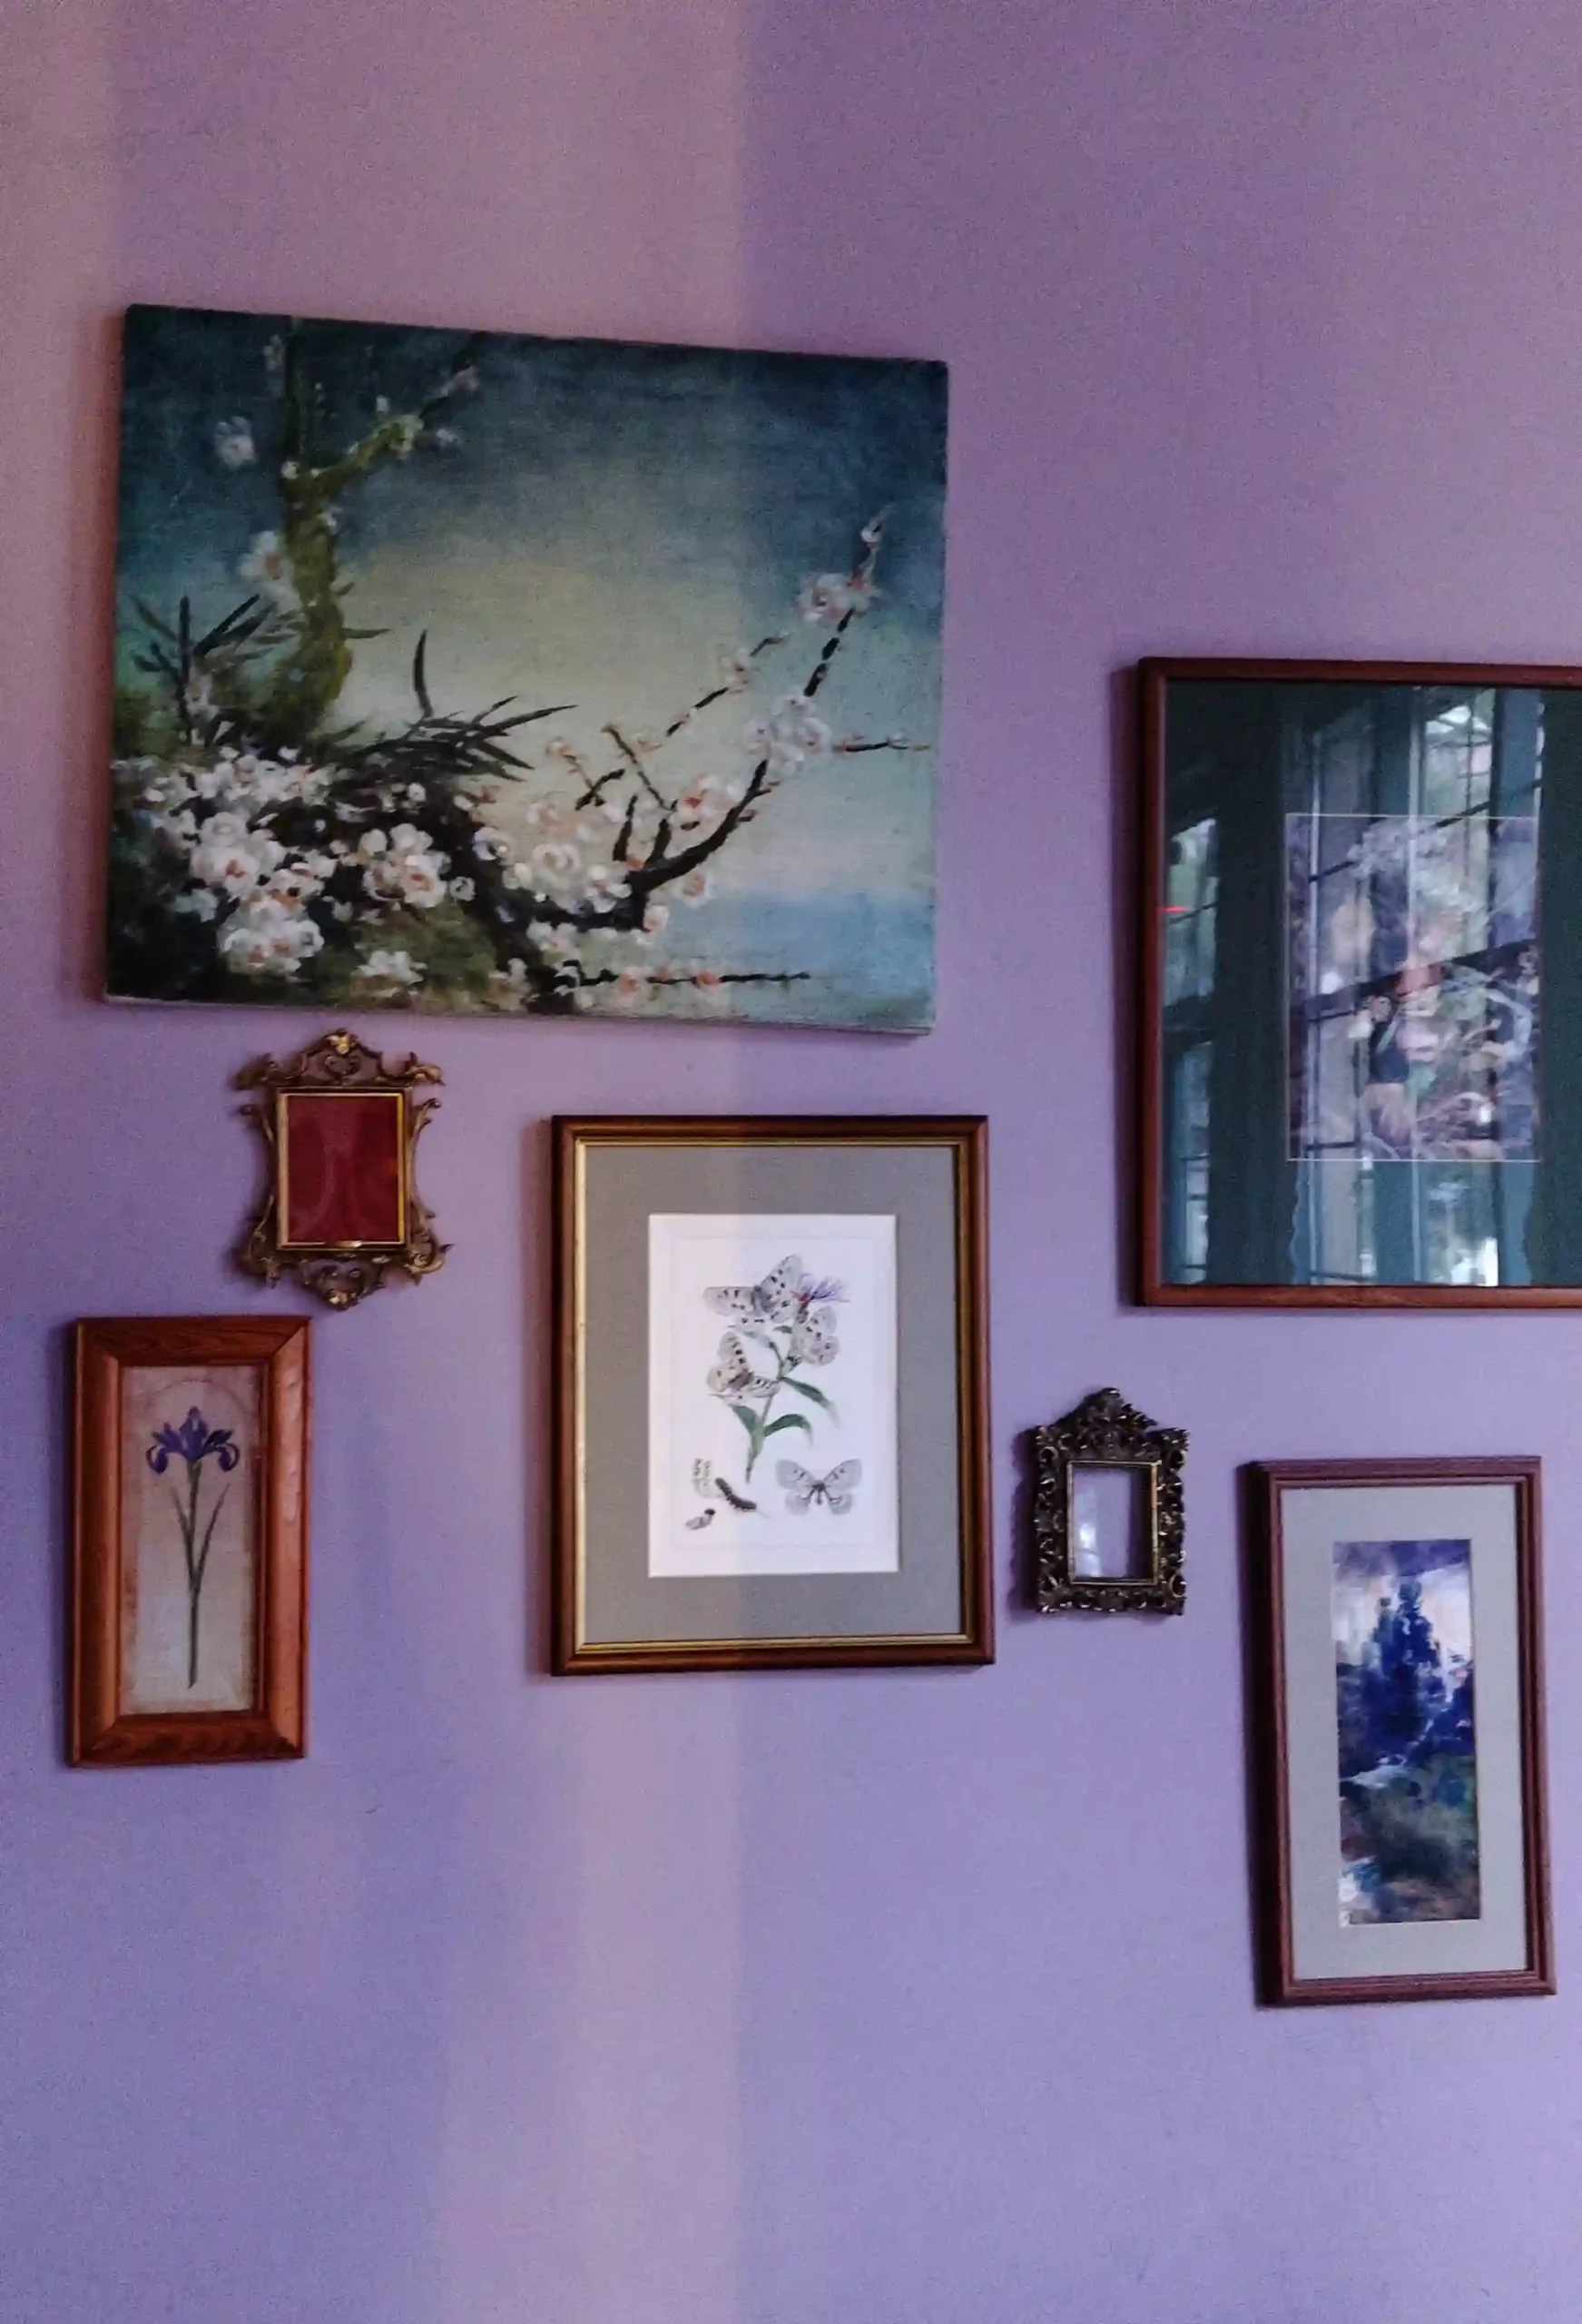 A lot of DIY art pictures on the wall.